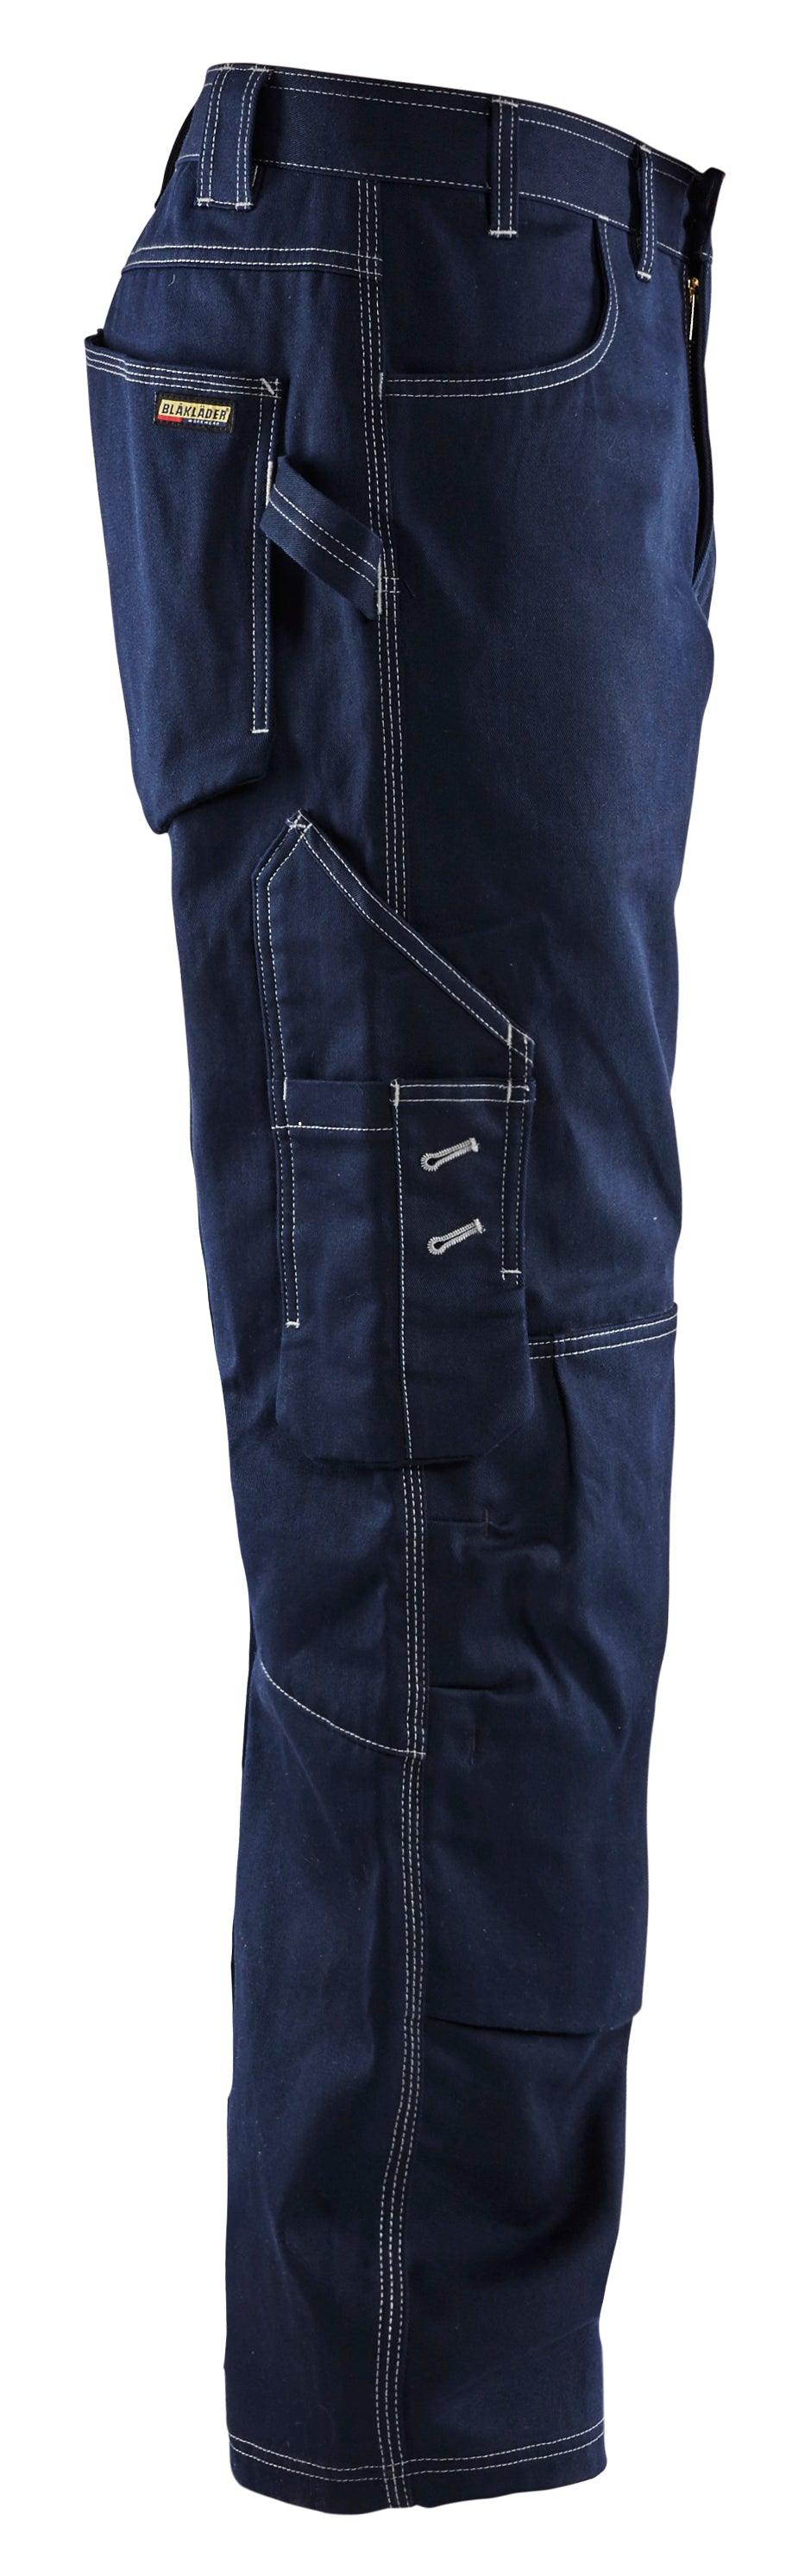 Top 10 Reliable Vietnam Jeans Manufacturers For Your Business